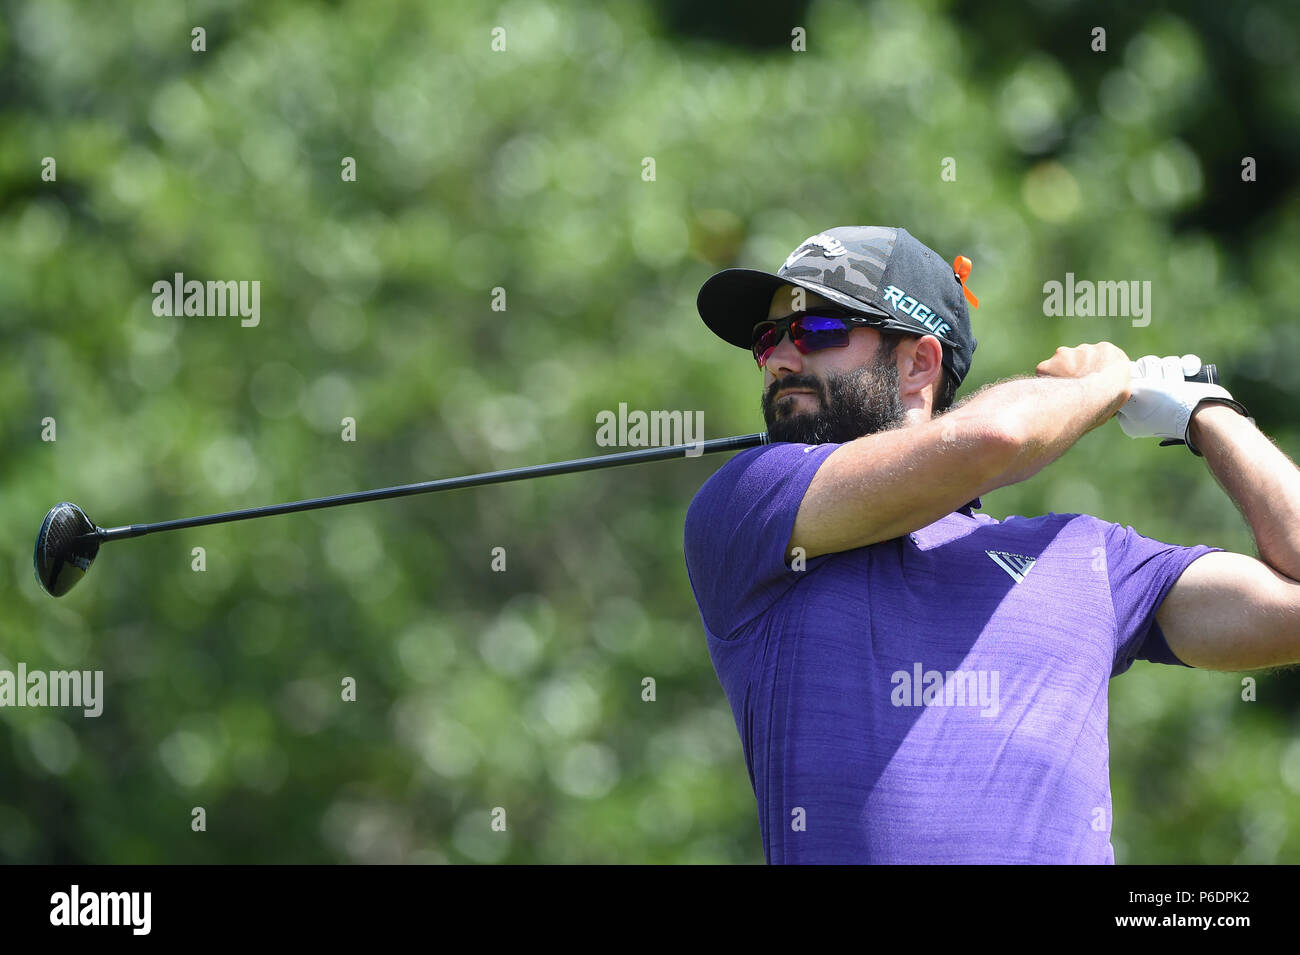 Potomac, Maryland, USA. JUNE 29, 2018 - Adam Hadwin (CAN) tees off at the sixteenth hole during the second round at the 2018 Quicken Loans National at the Tournament Players Club in Potomac MD. Credit: Cal Sport Media/Alamy Live News Stock Photo